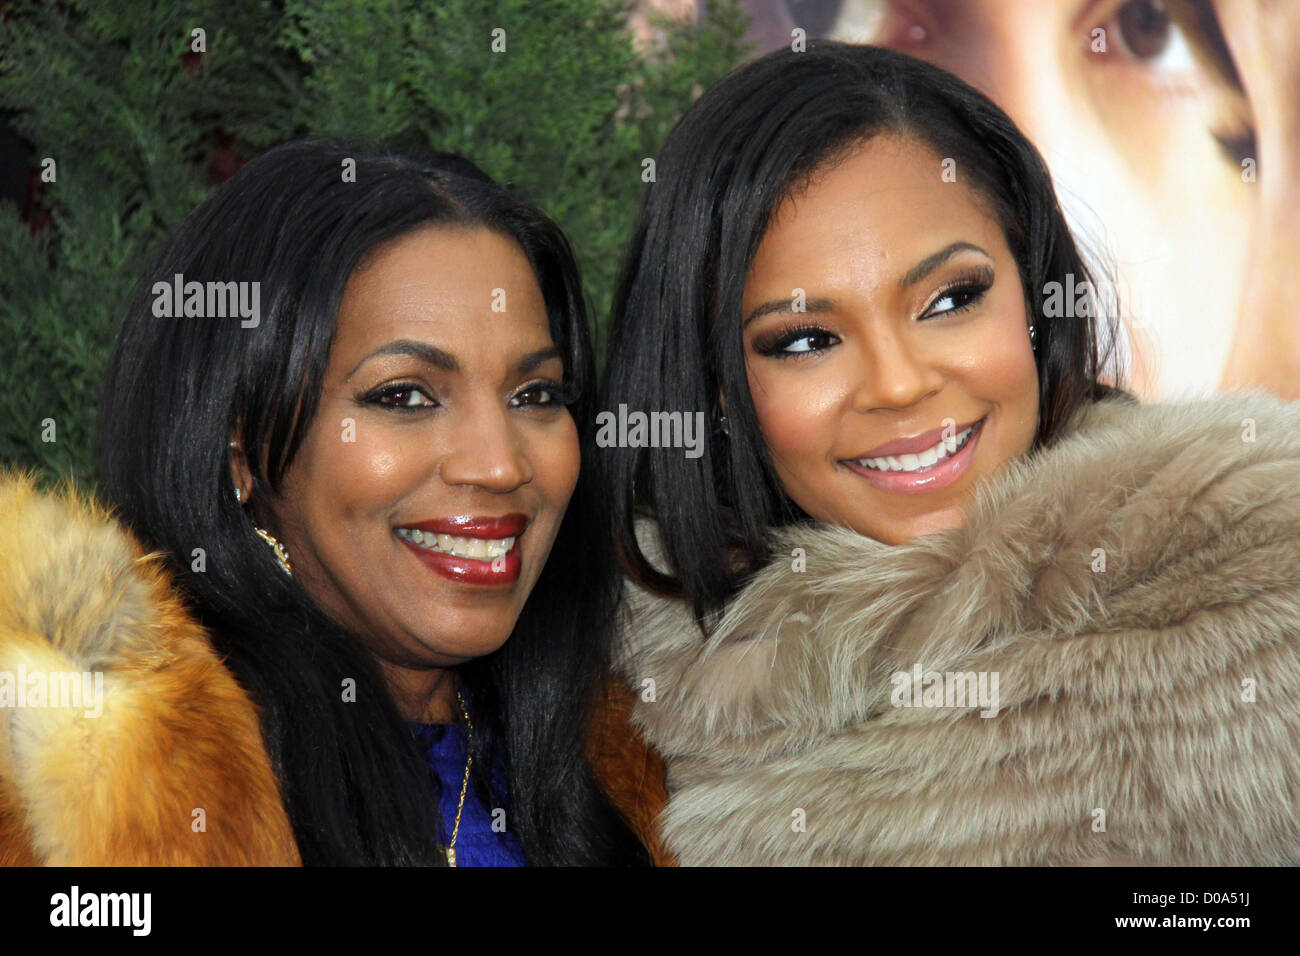 Ashanti and her mother World premiere of 'The Tourist' held at Ziegfeld Theatre - Arrivals New York City, USA - 06.12.10 Stock Photo